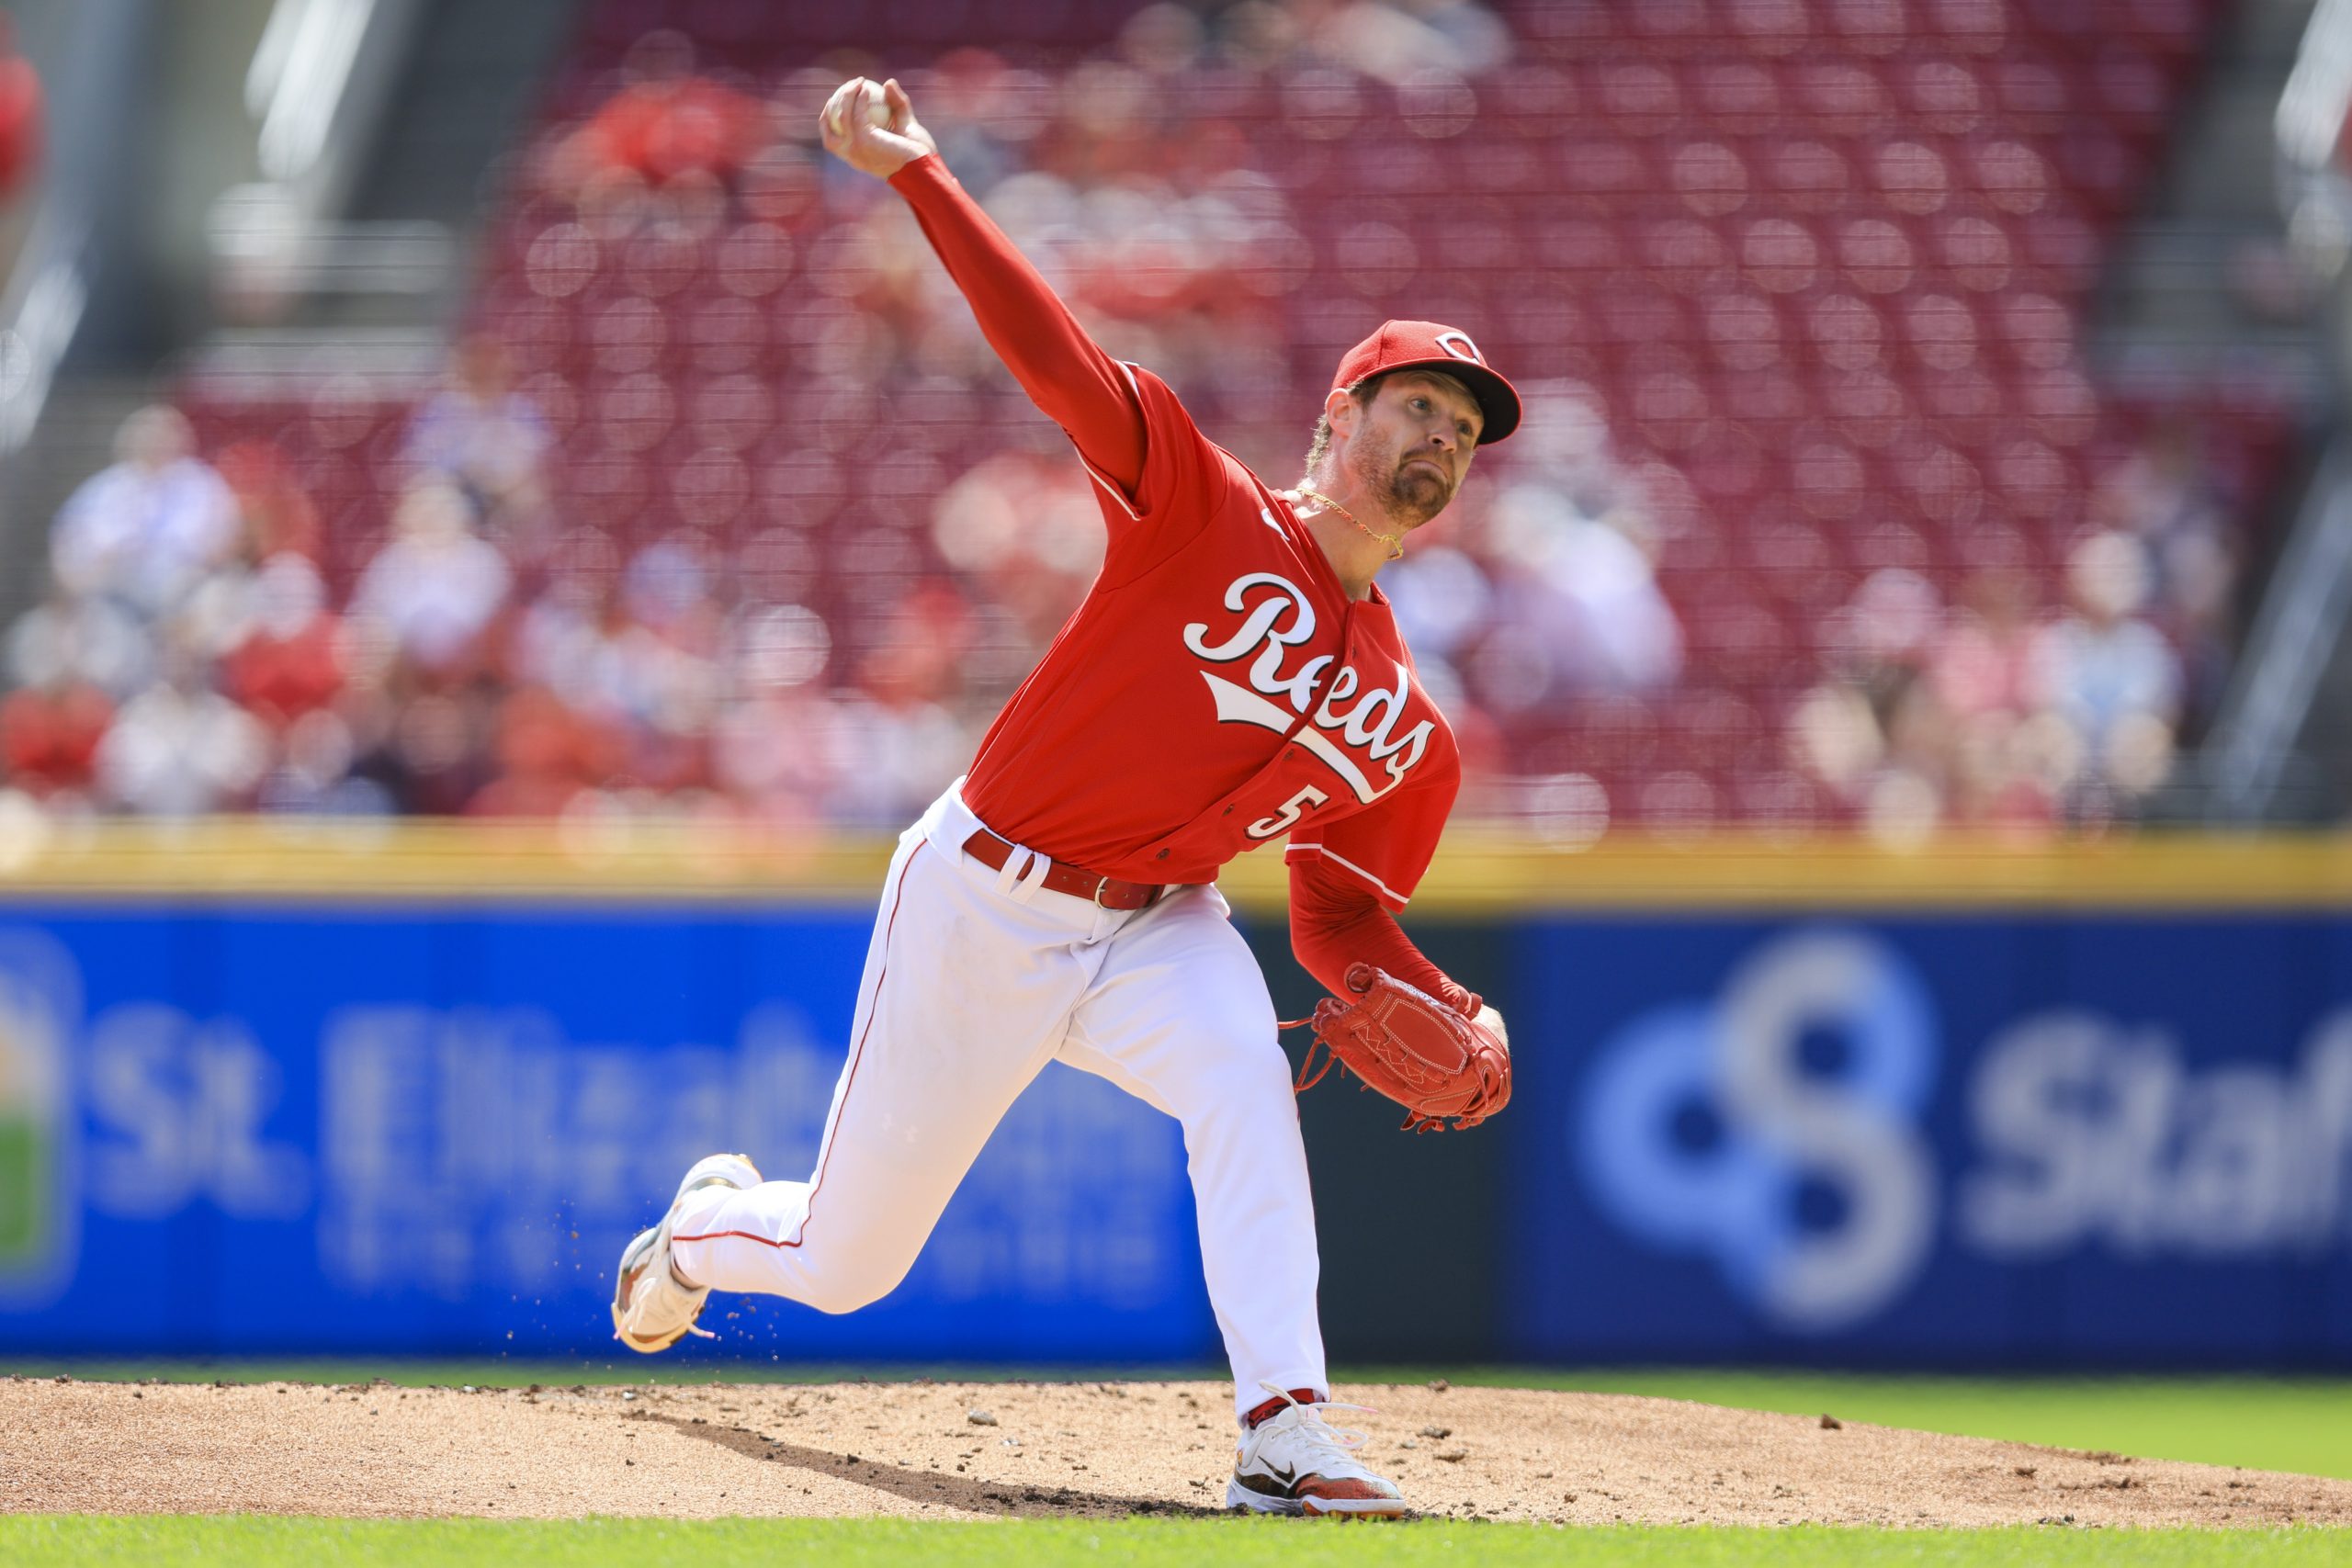 Levi Stoudt to make Major League debut for Reds on Wednesday